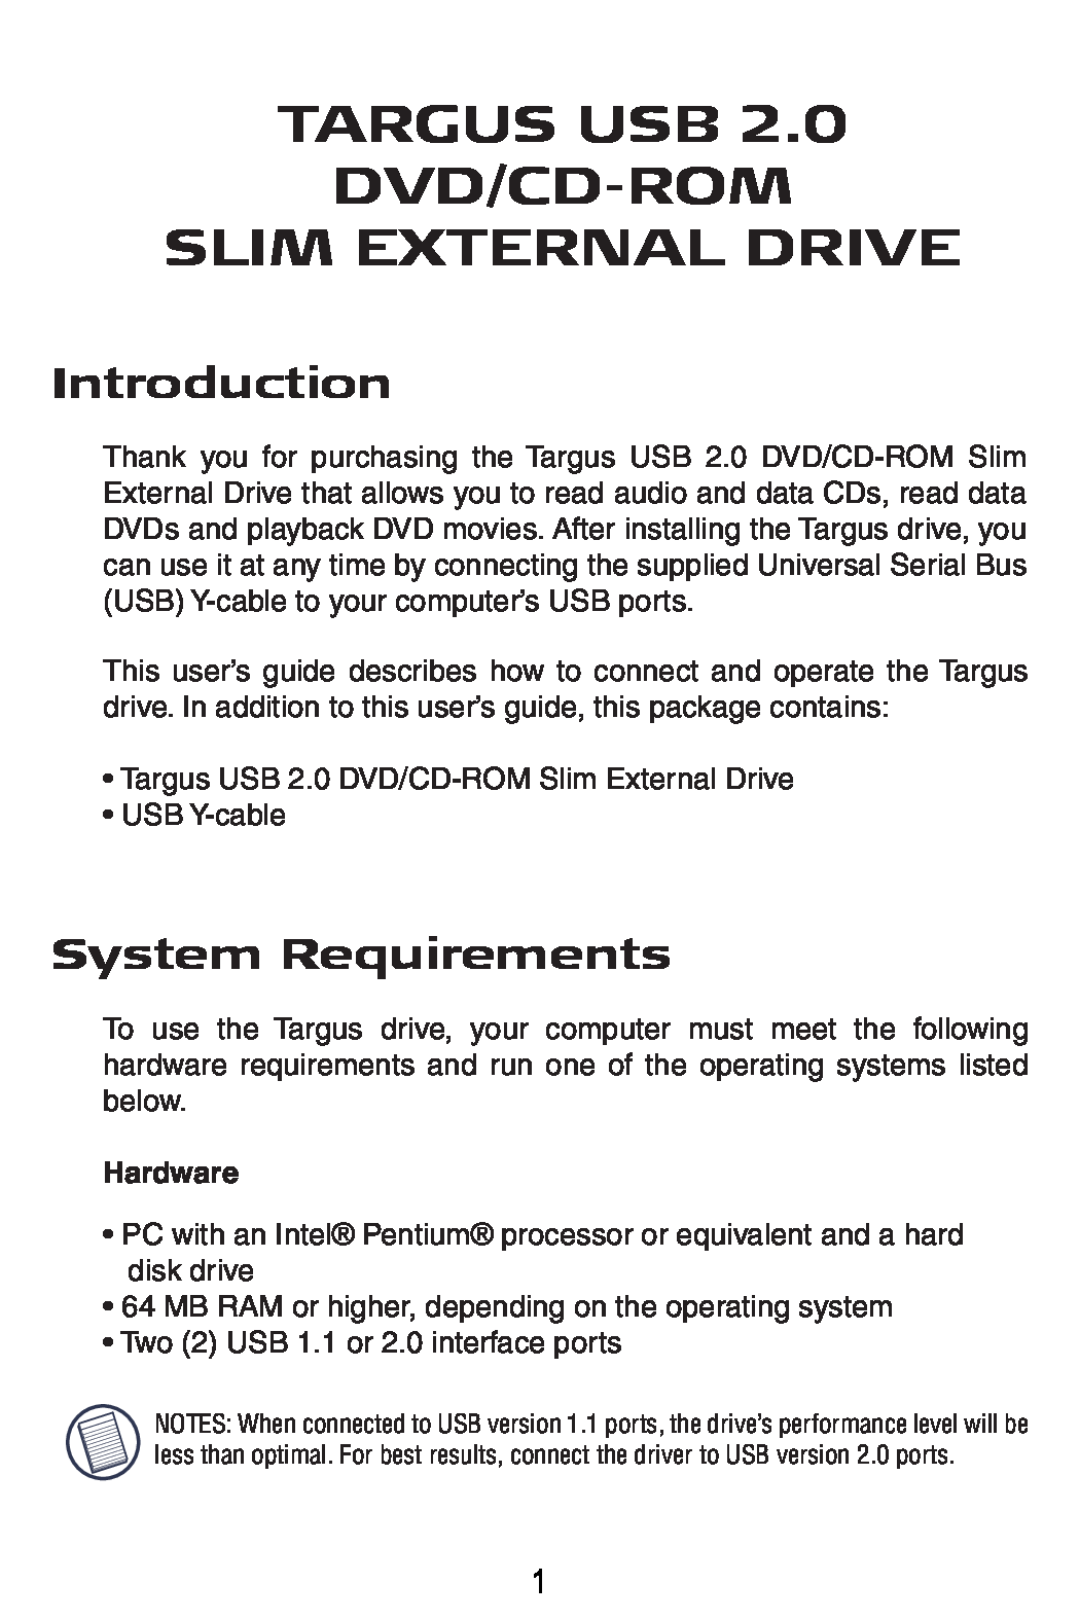 Targus PA410 specifications Targus Usb Dvd/Cd-Rom Slim External Drive, Introduction, System Requirements, Hardware 